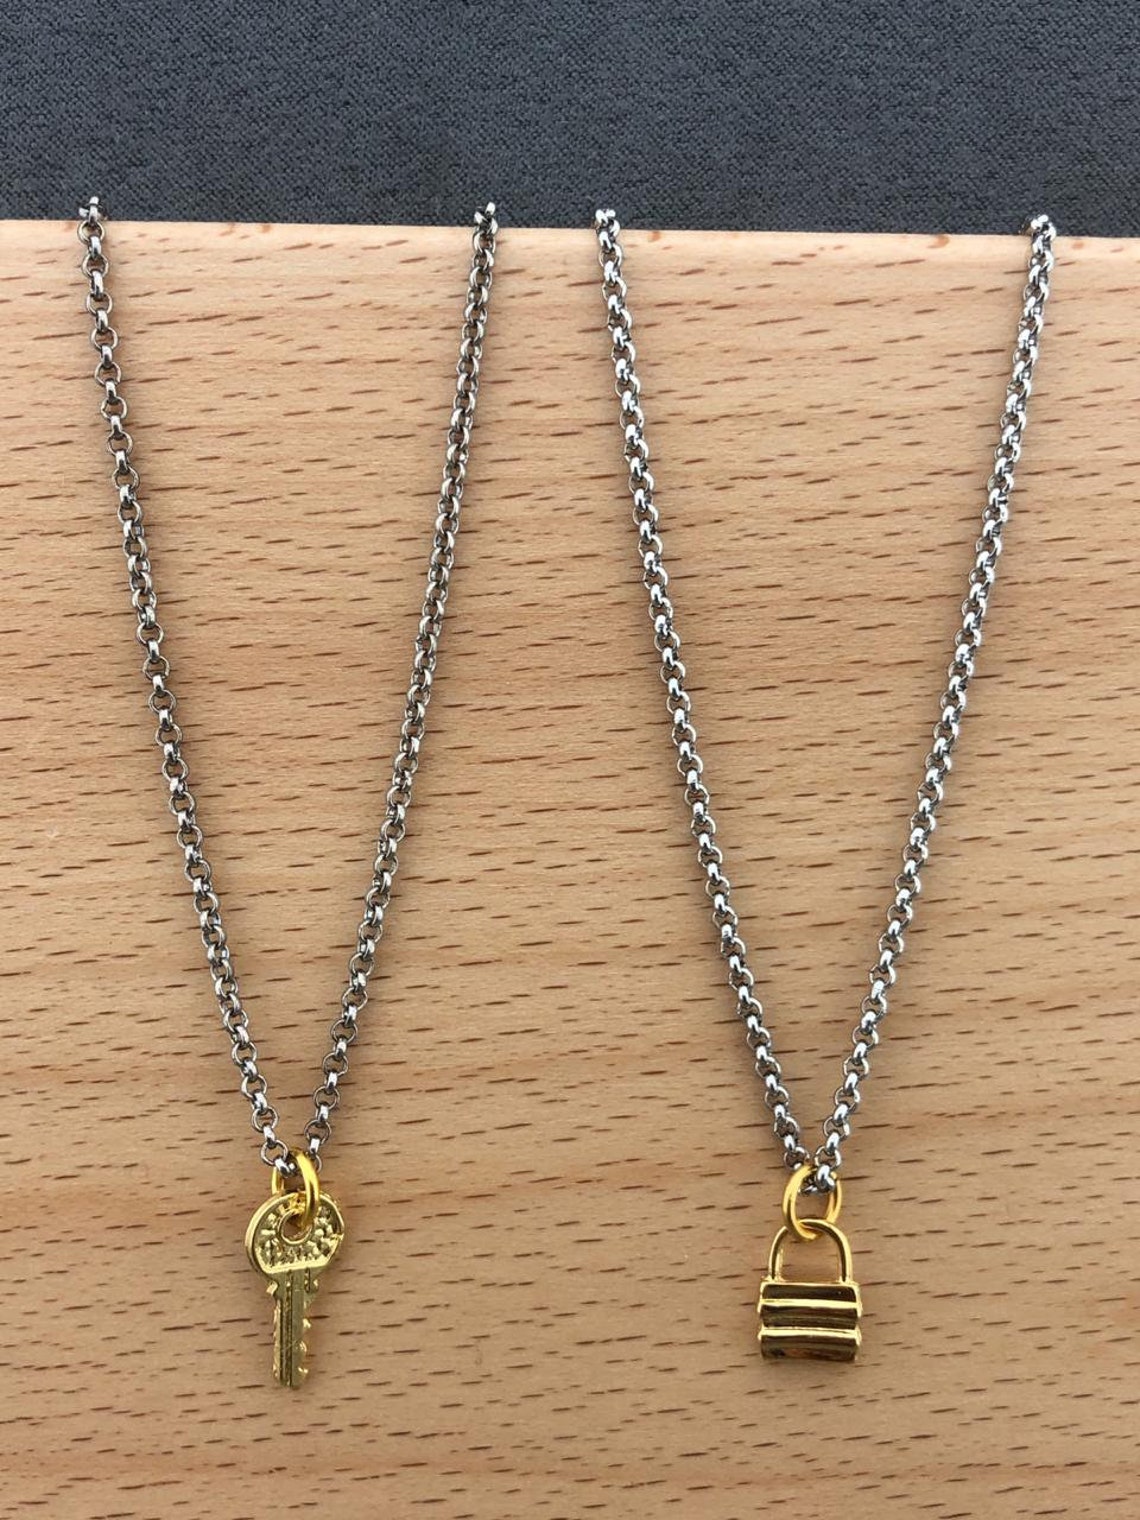 Couples Necklaces/ Rhodium Plating Chains/ 22k Gold Plaited - Etsy Ireland